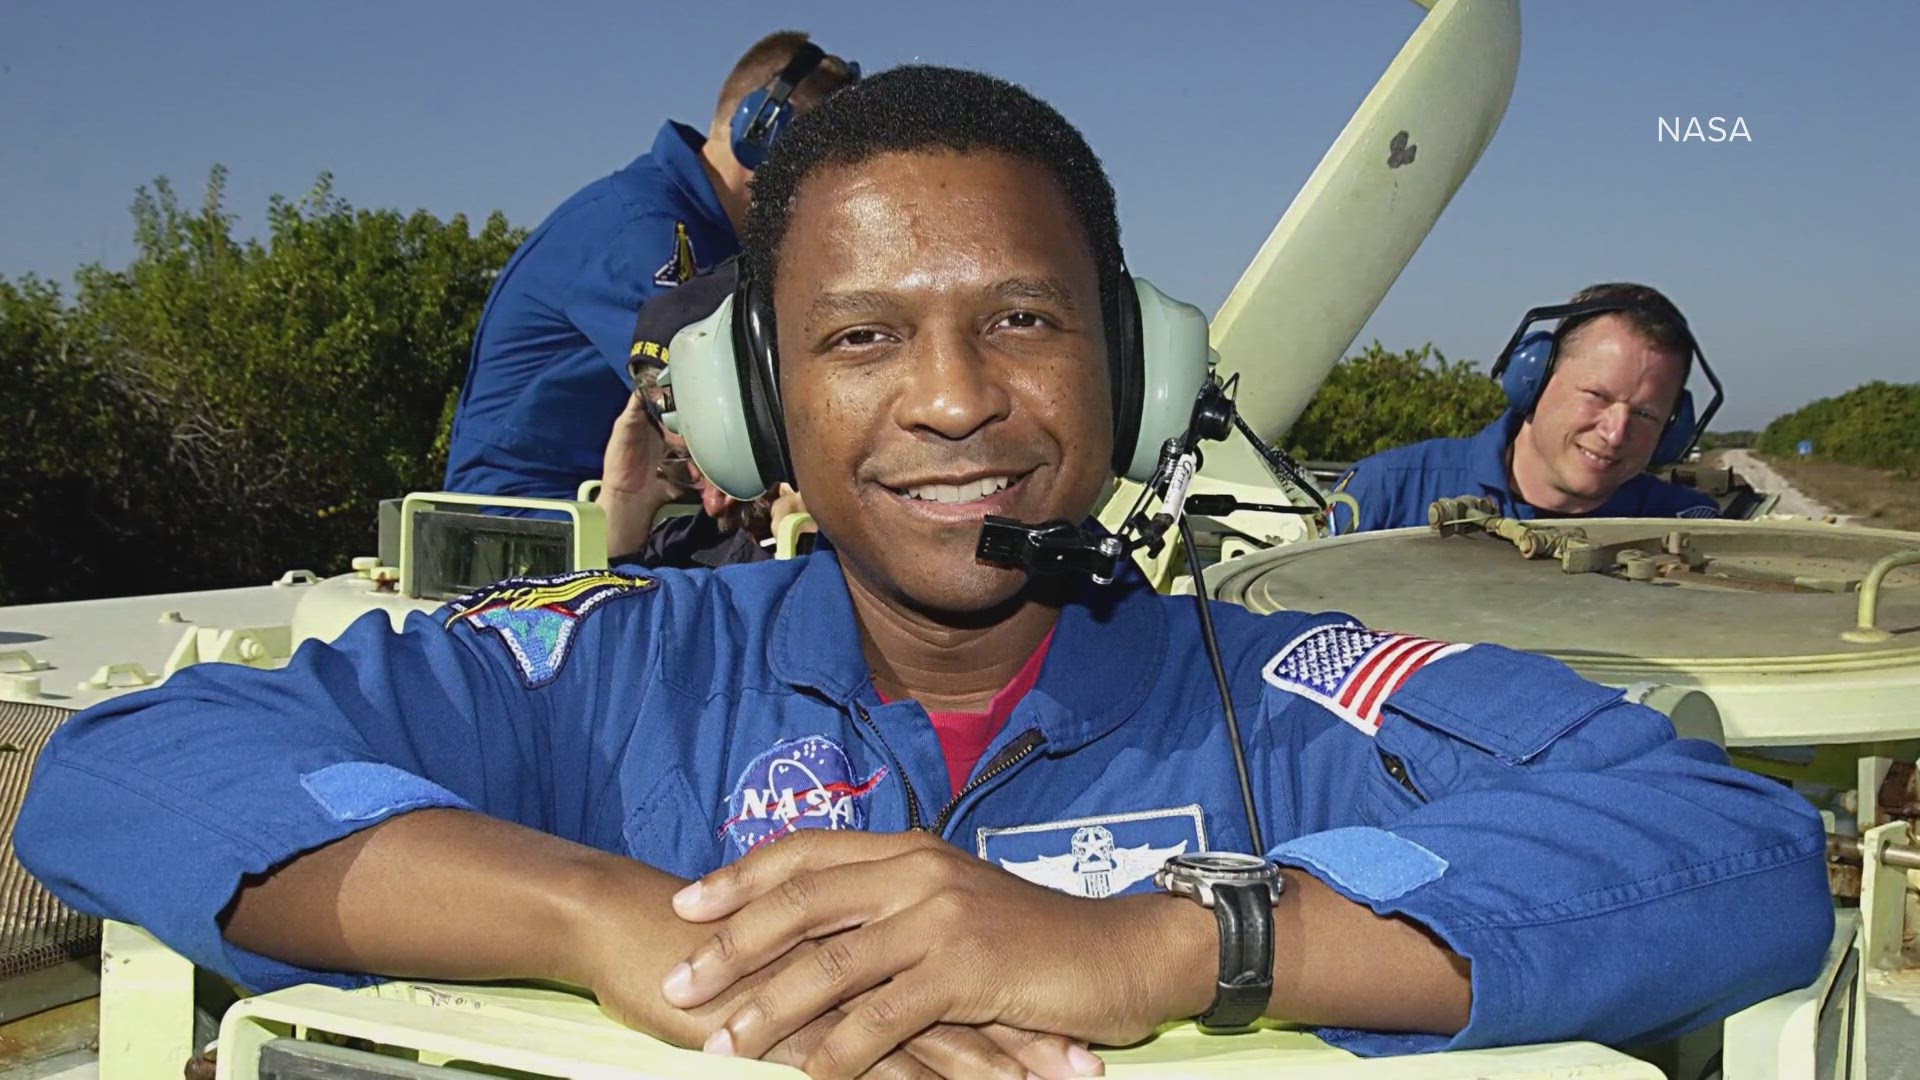 In honor of Black History Month, we take a moment to remember the life and legacy of astronaut Michael Anderson.